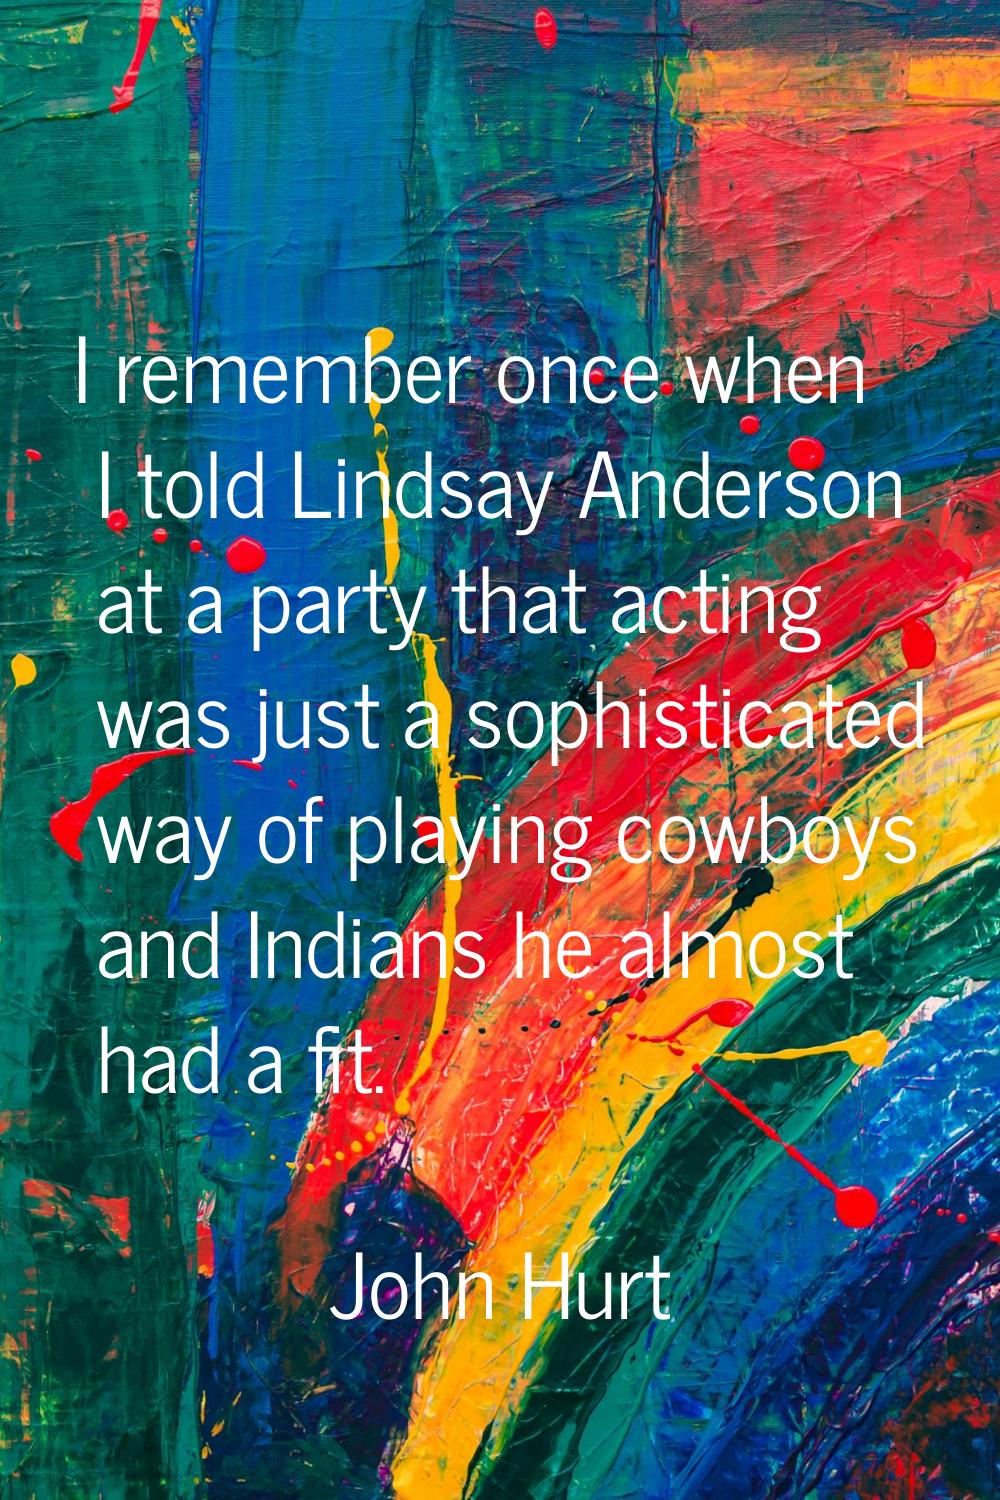 I remember once when I told Lindsay Anderson at a party that acting was just a sophisticated way of